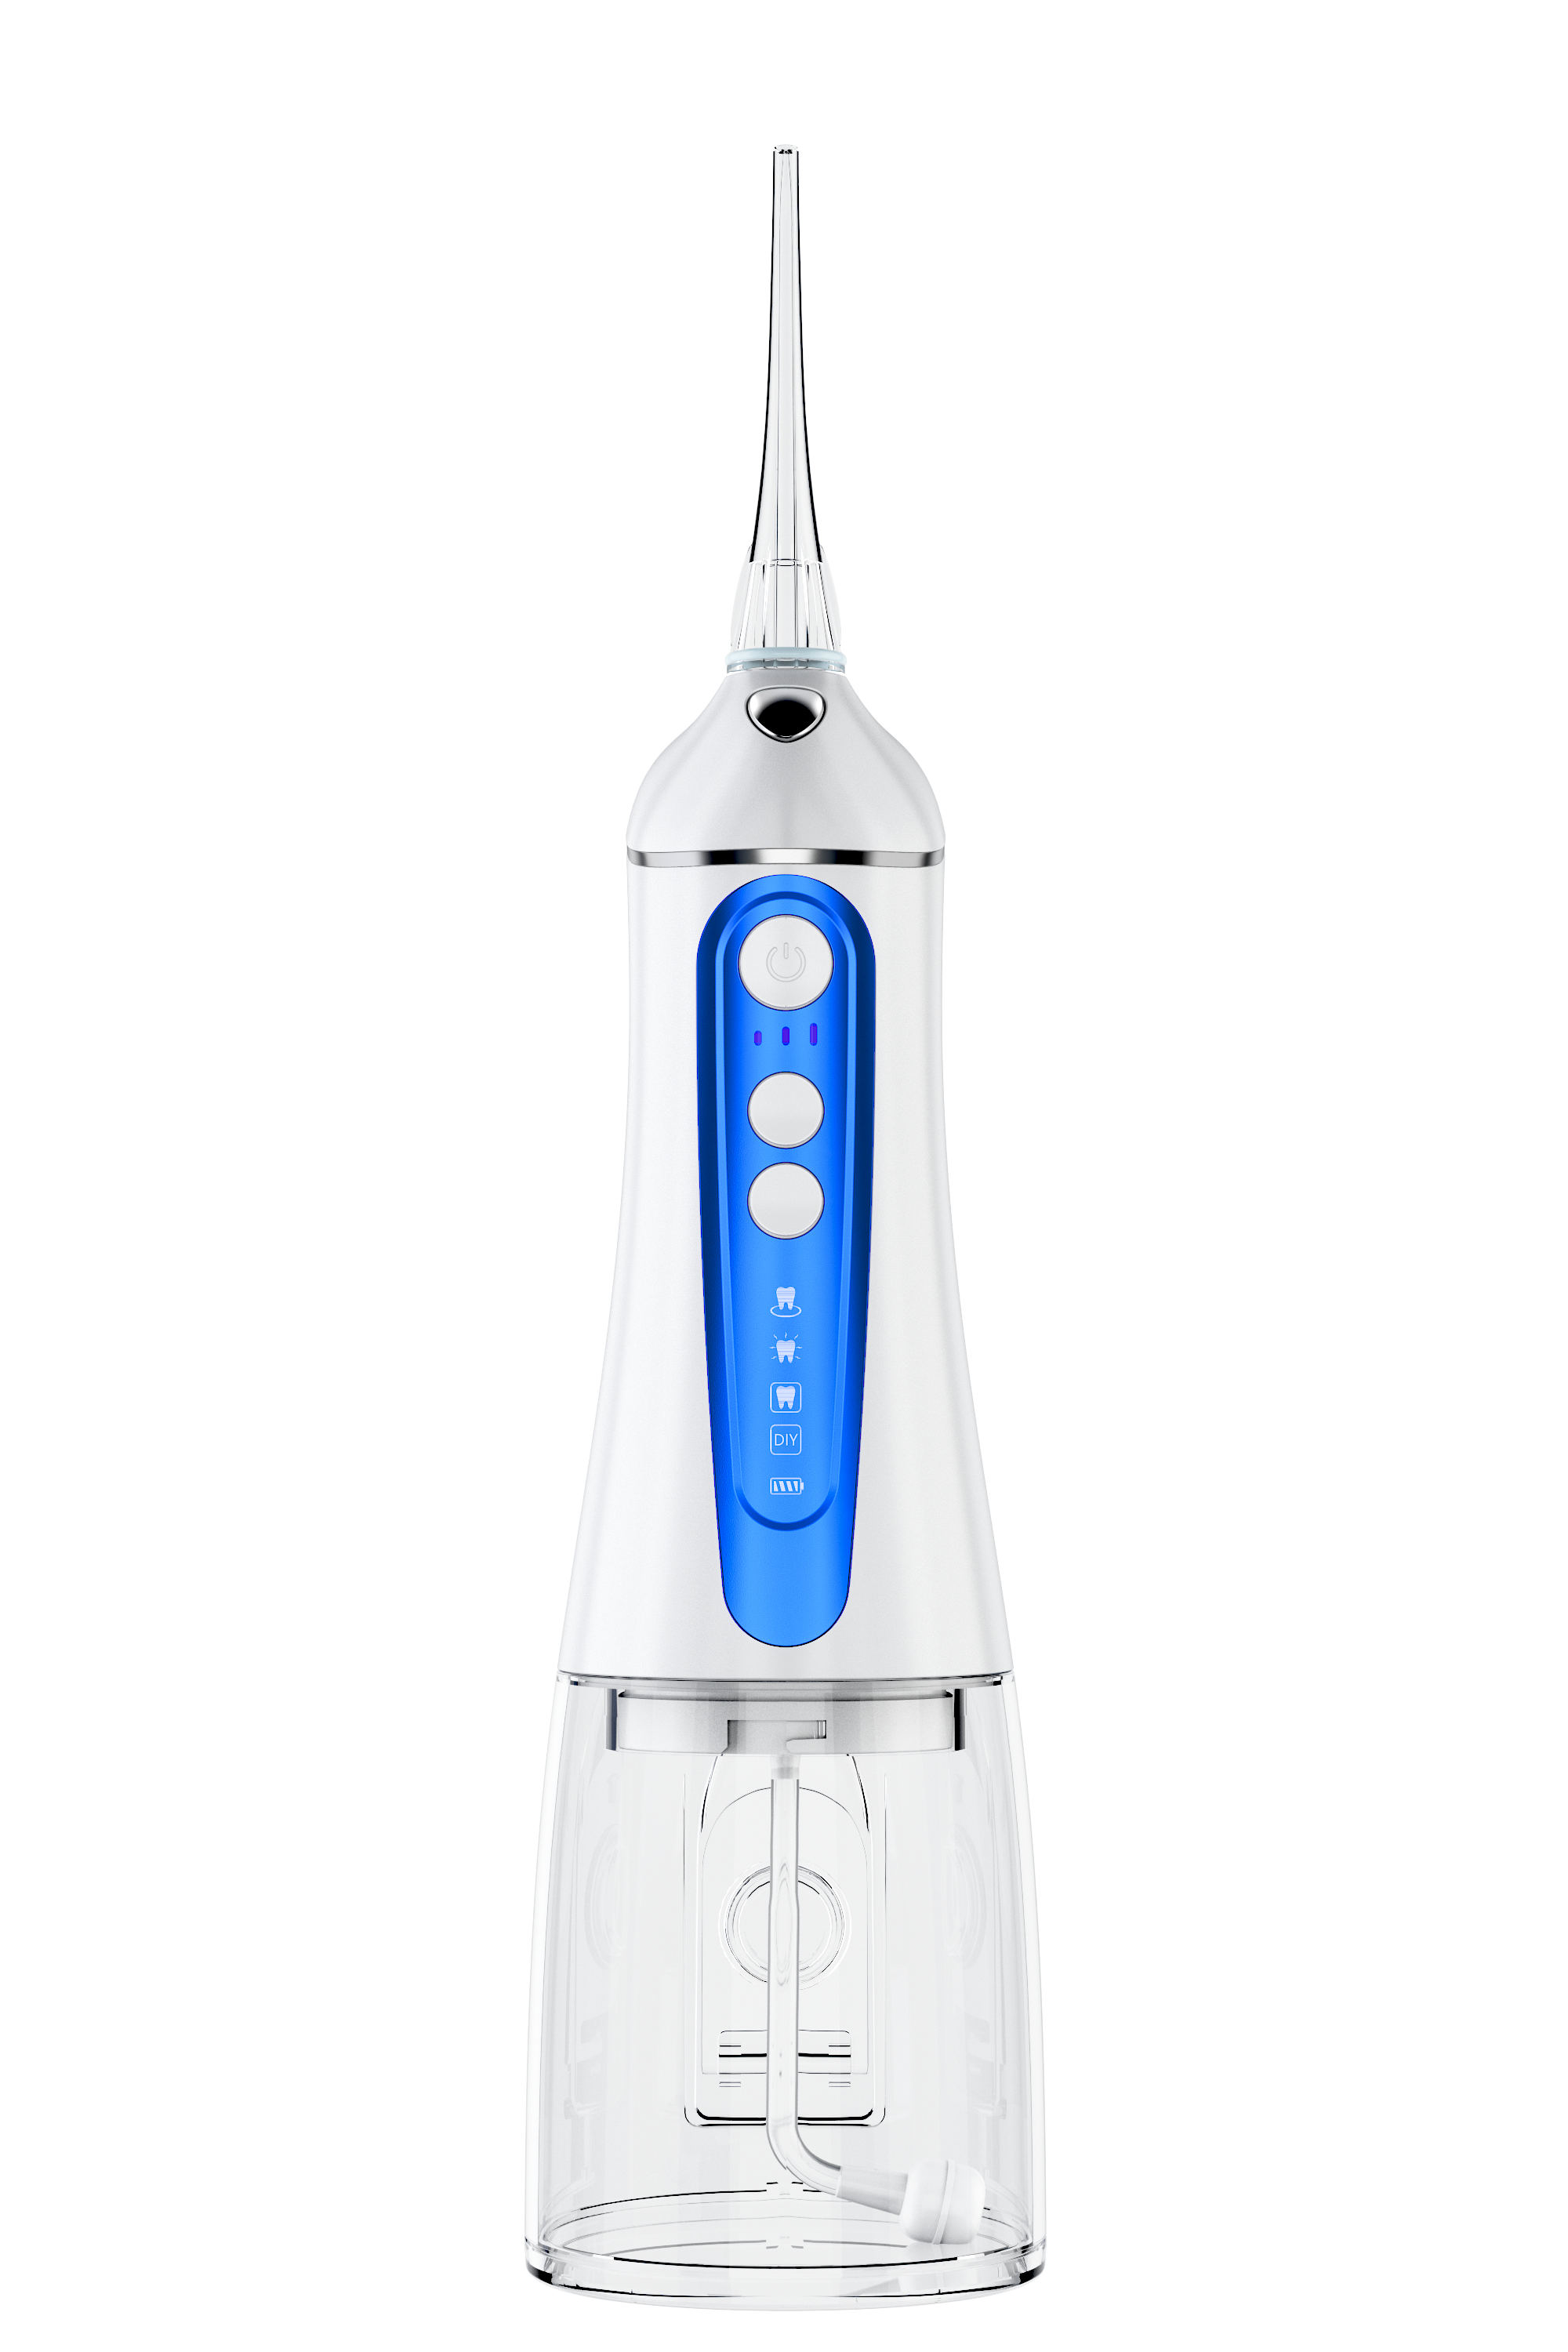 Water Flosser for Teeth 320ML Water Flossers Dental Oral Irrigator with DIY Mode 4 Jet Tips, IPX7 Waterproof,Portable for Home&Travel